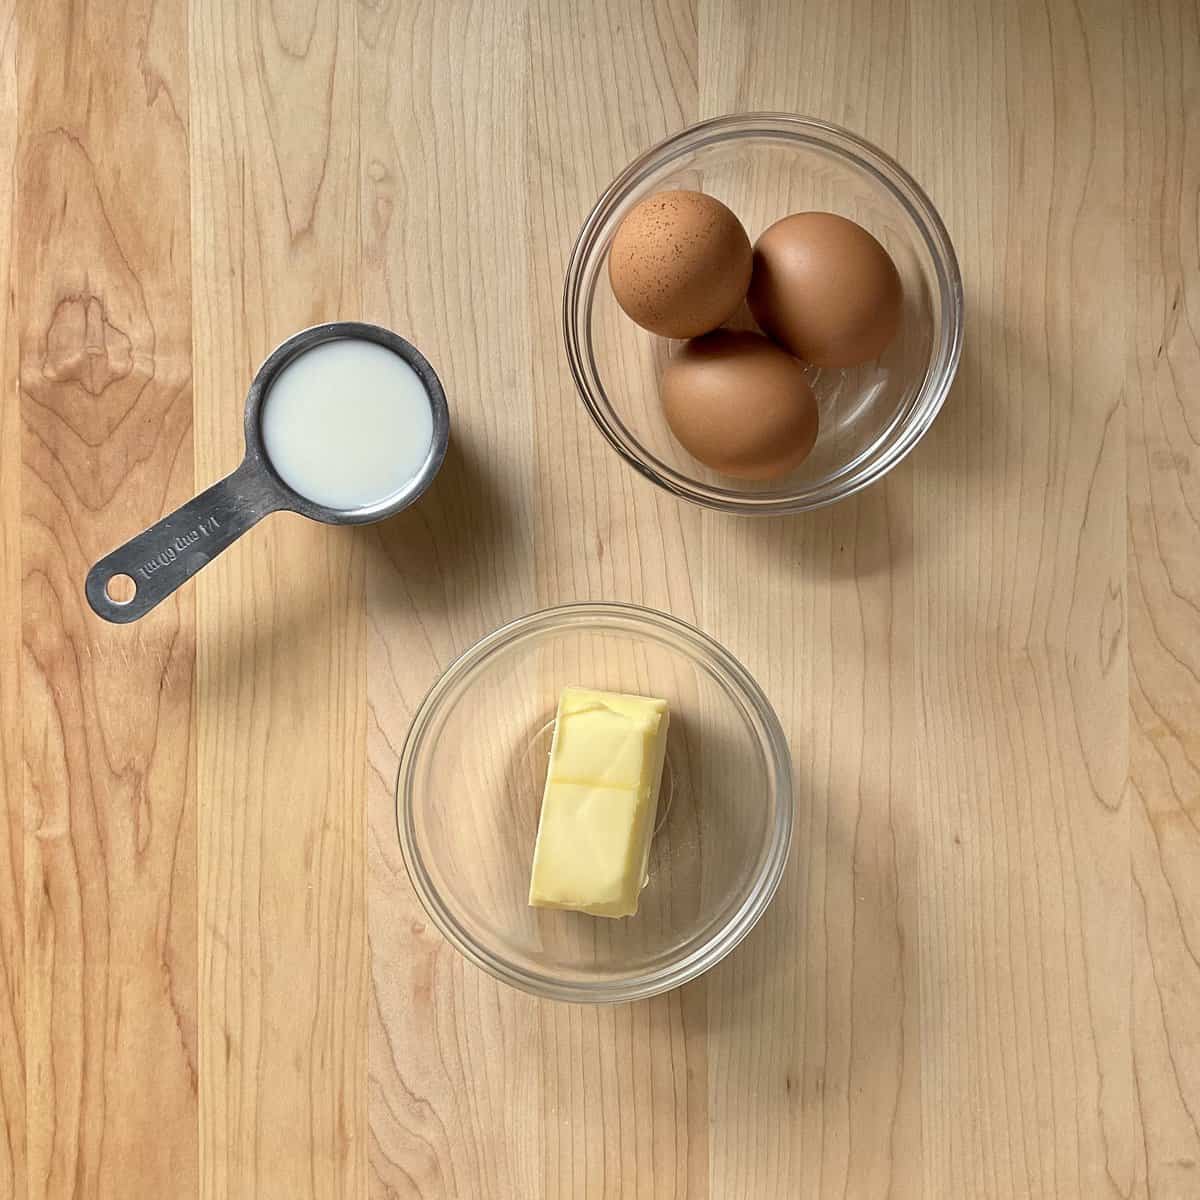 Eggs, butter and milk in bowls.